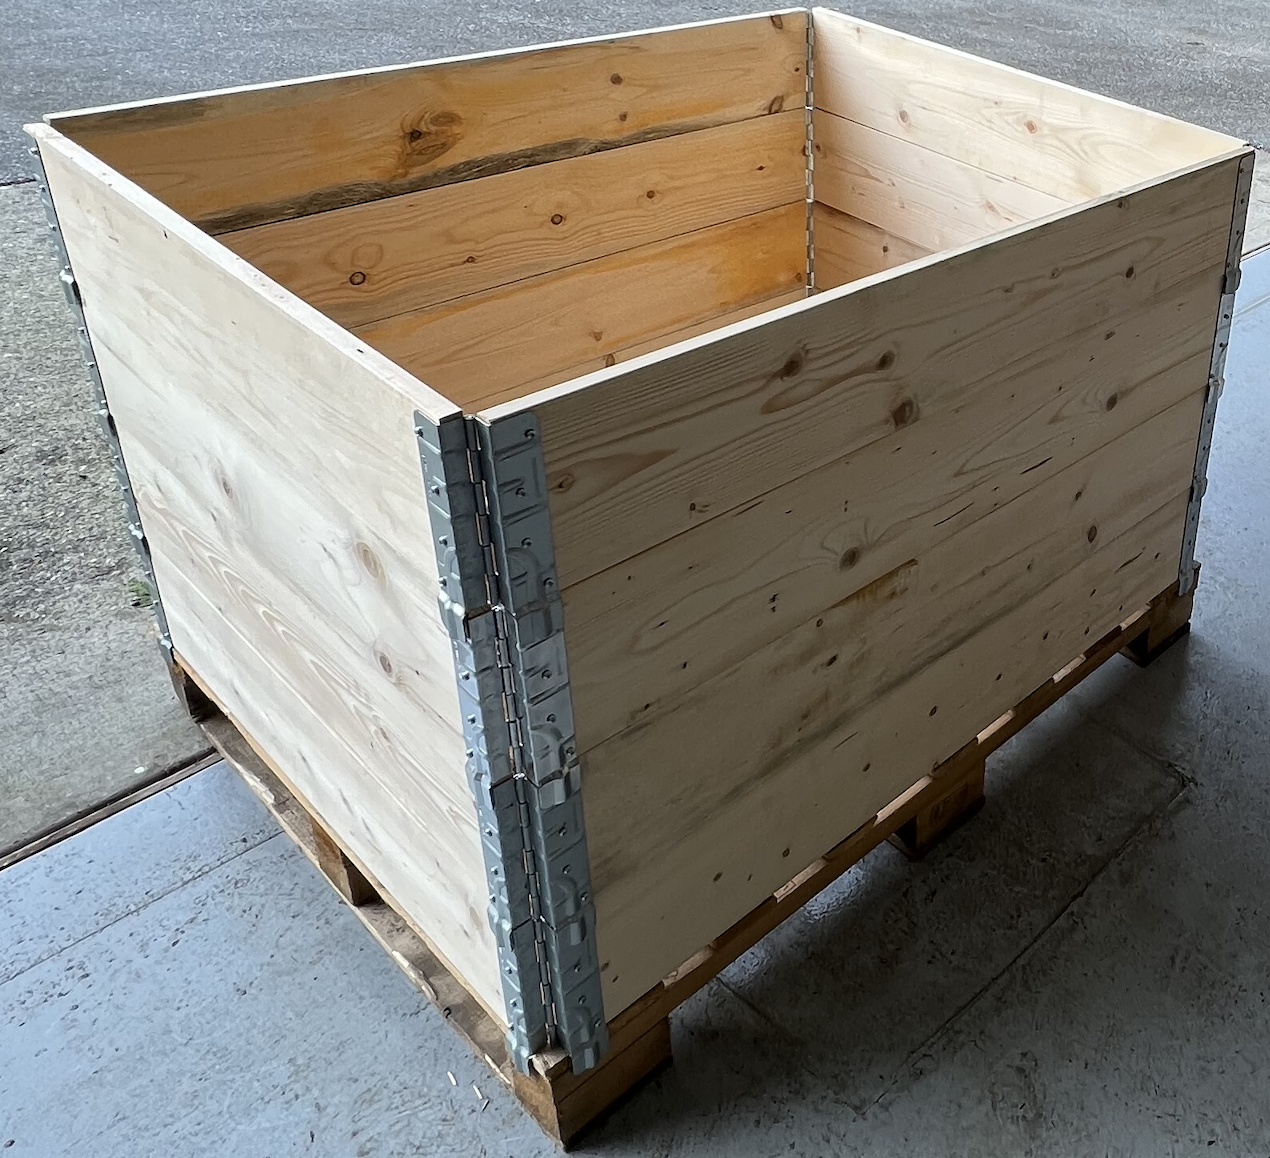 industry standard size pallet collars that are ispm 15 certified for importing and exporting products in canada